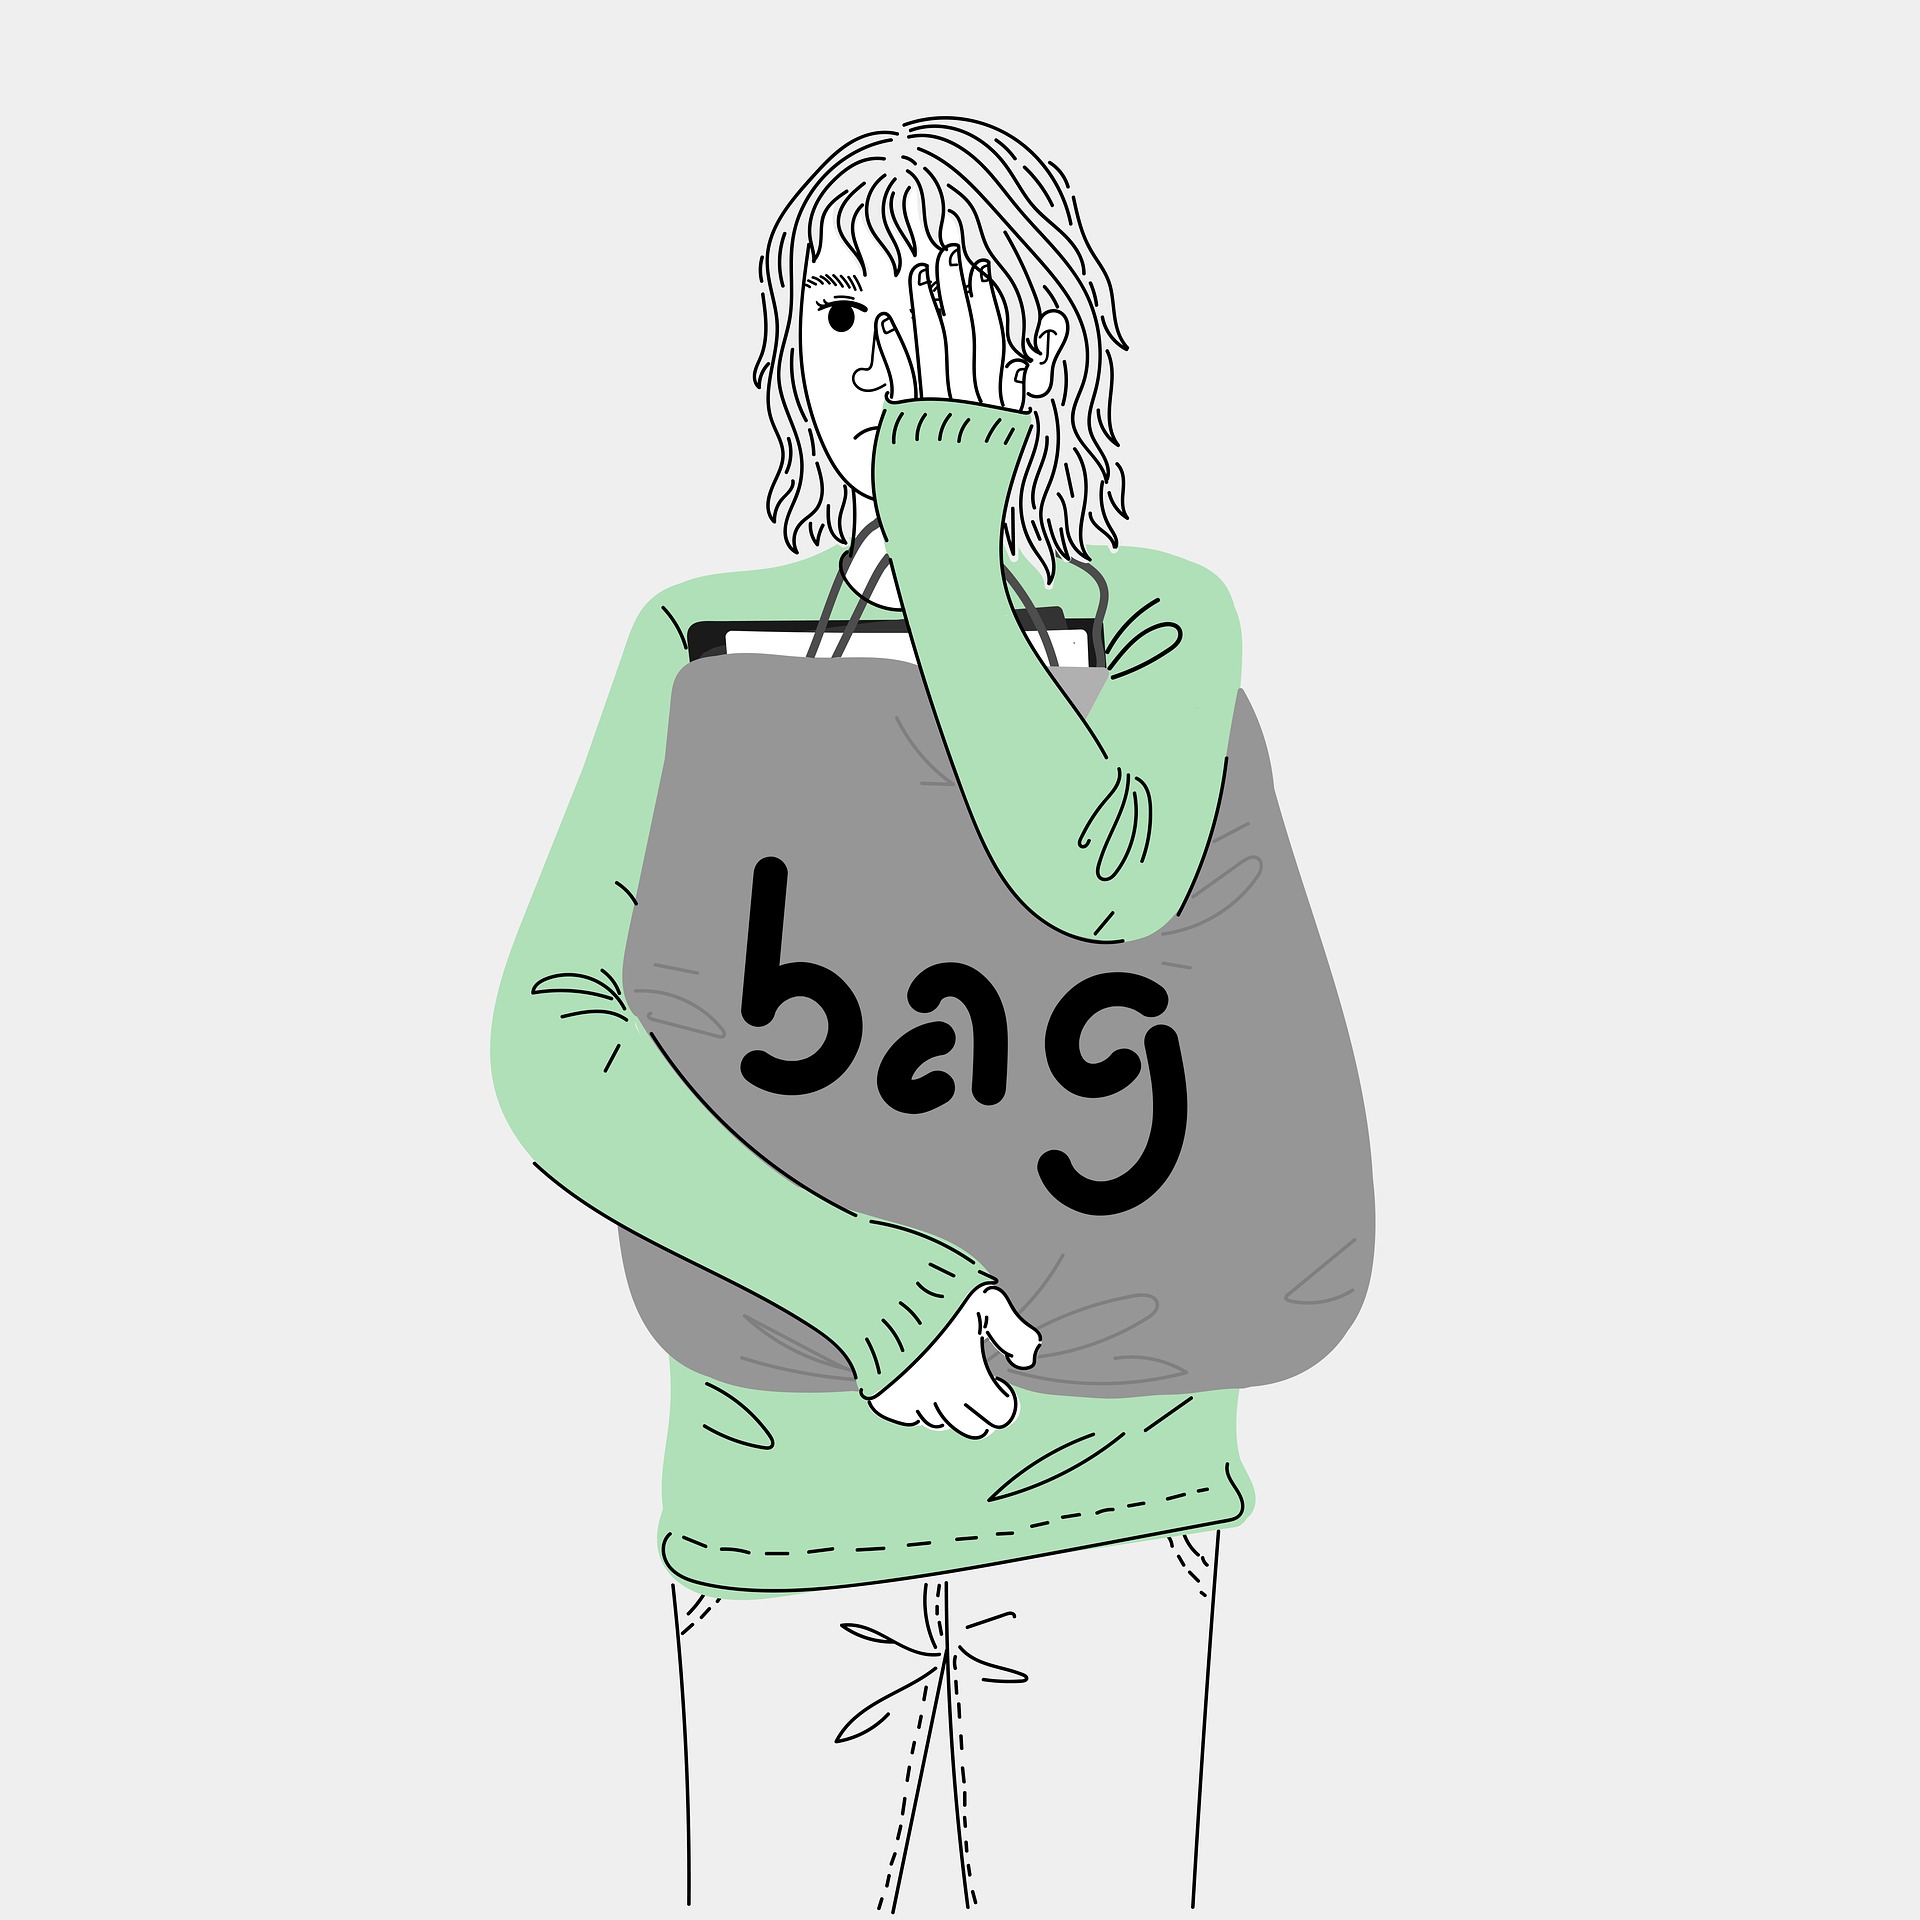 a woman in a green shirt is holding a bag that says the word "bag" spelled out on it. She is covered one eye with her hand and appears overwhelmed.